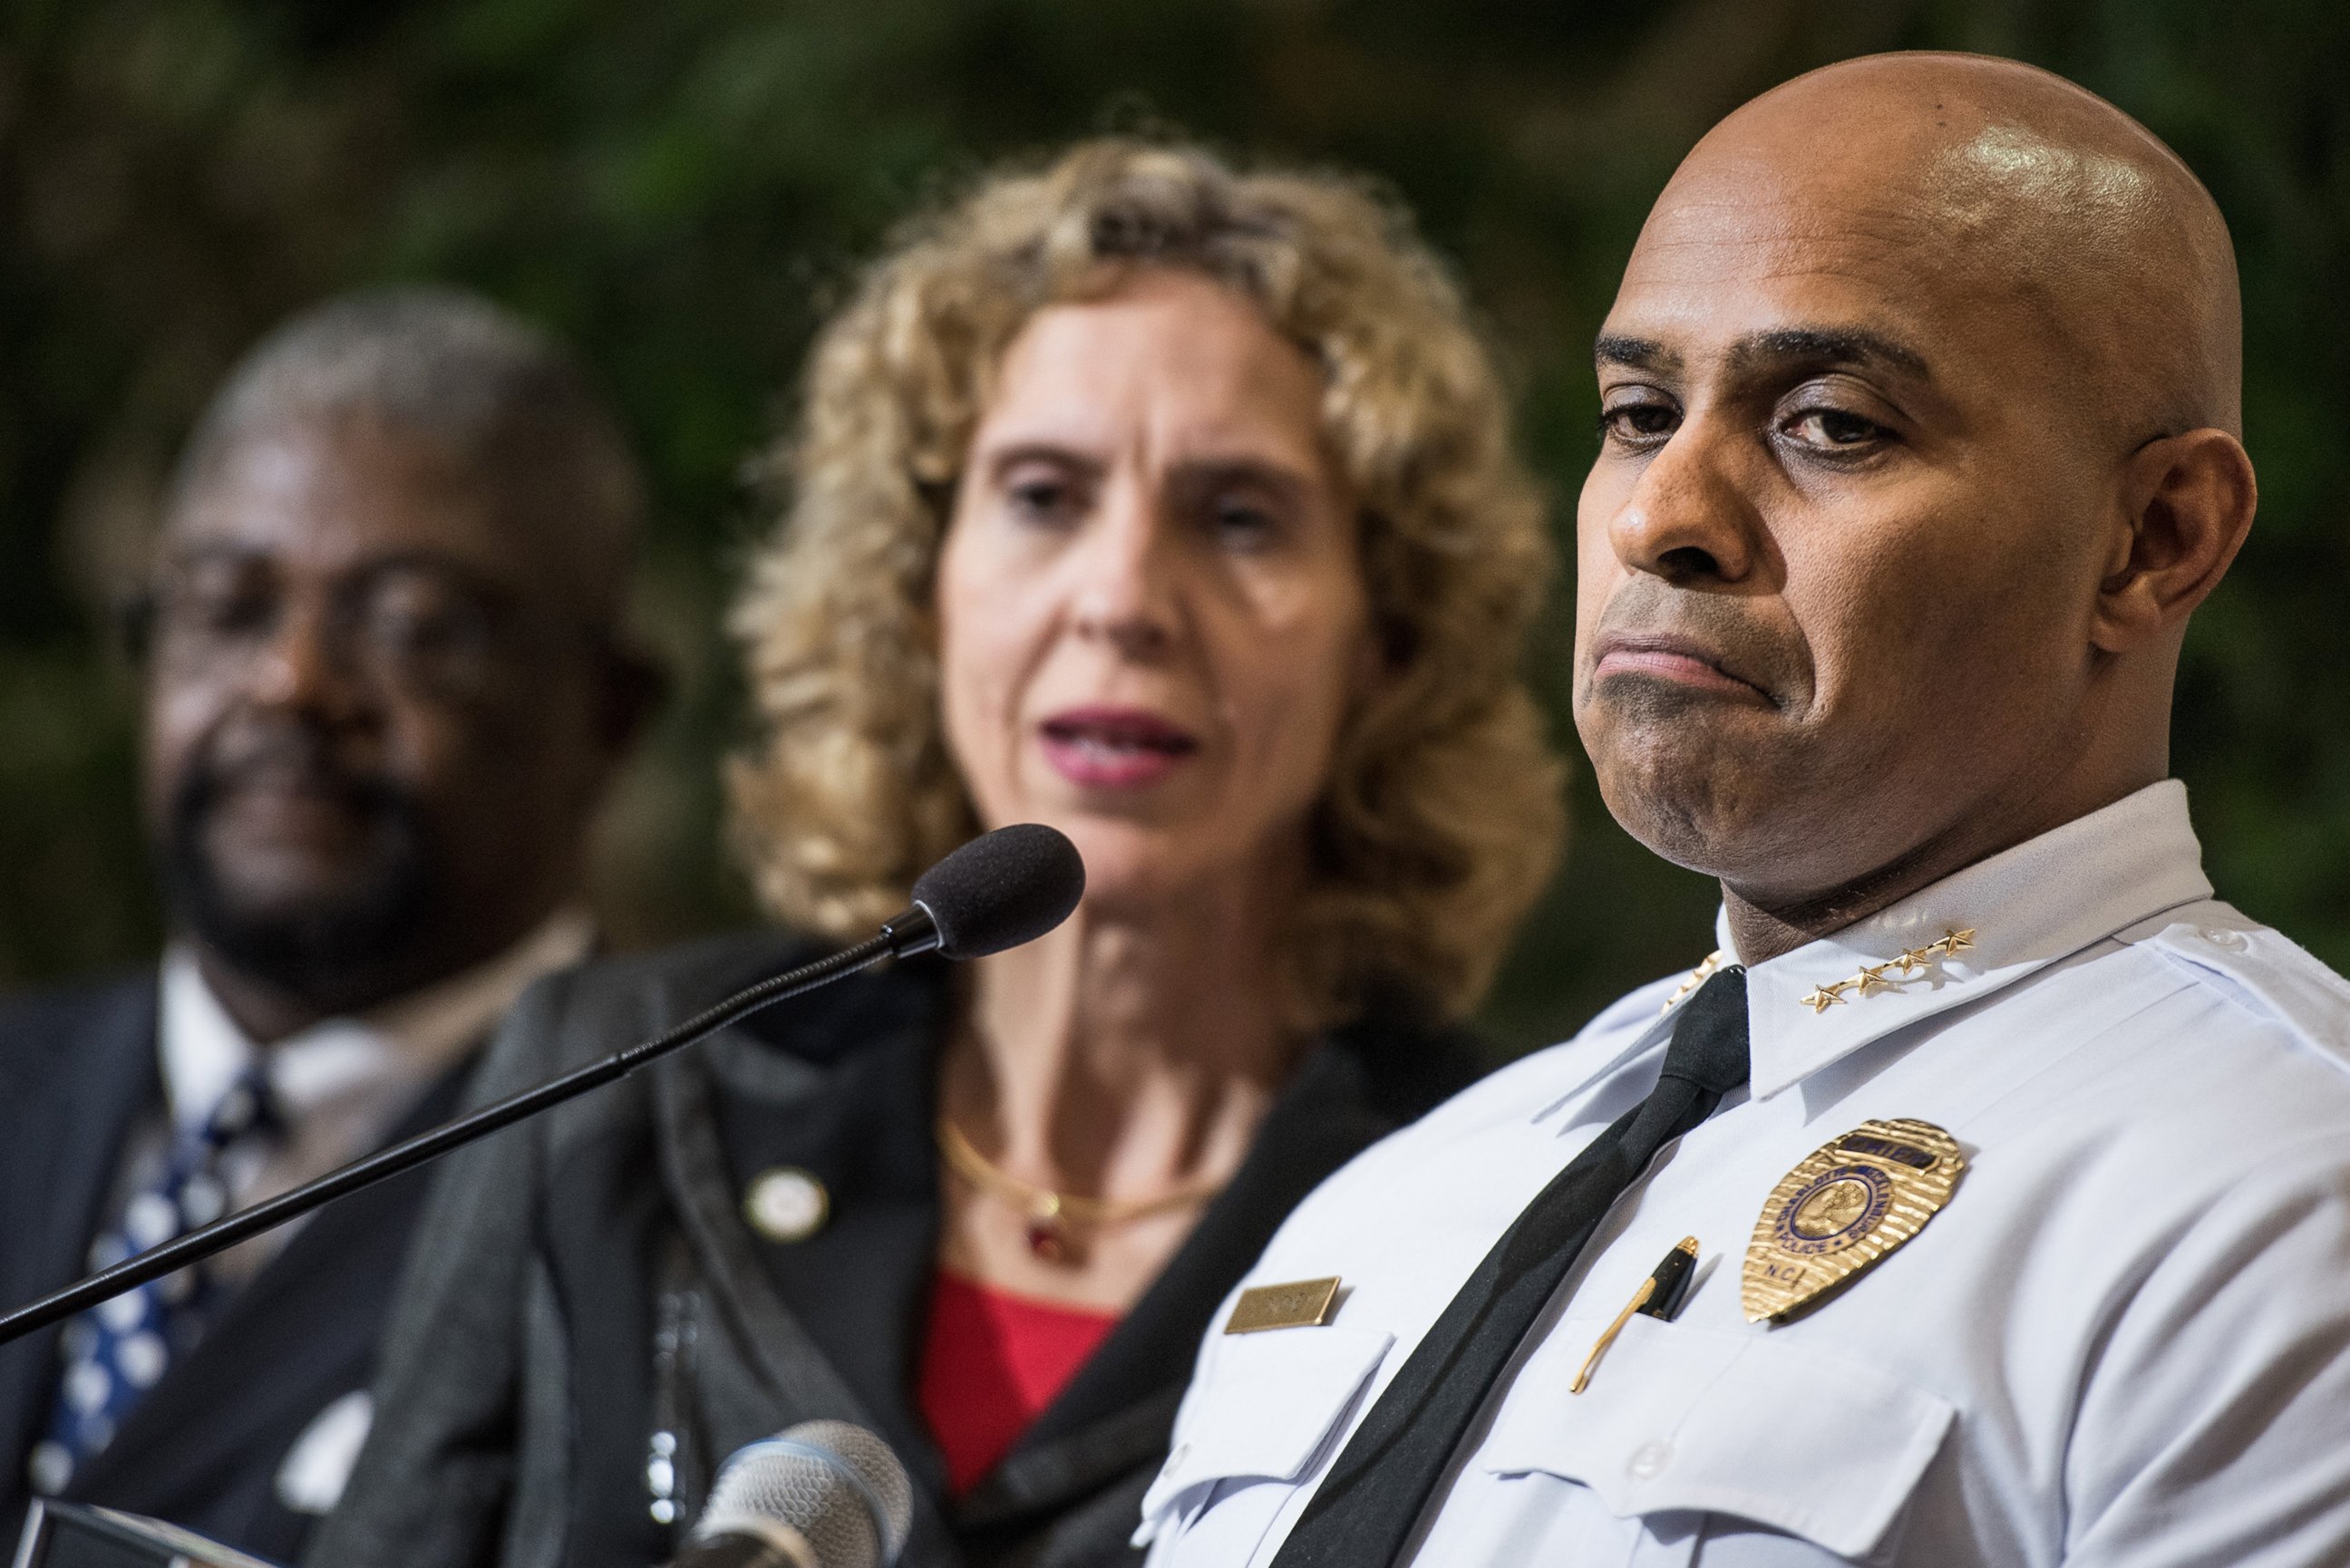 PHOTO: Charlotte-Mecklenburg Police Chief Kerr Putney fields questions from the media, Sept. 22, 2016 in Charlotte, North Carolina.